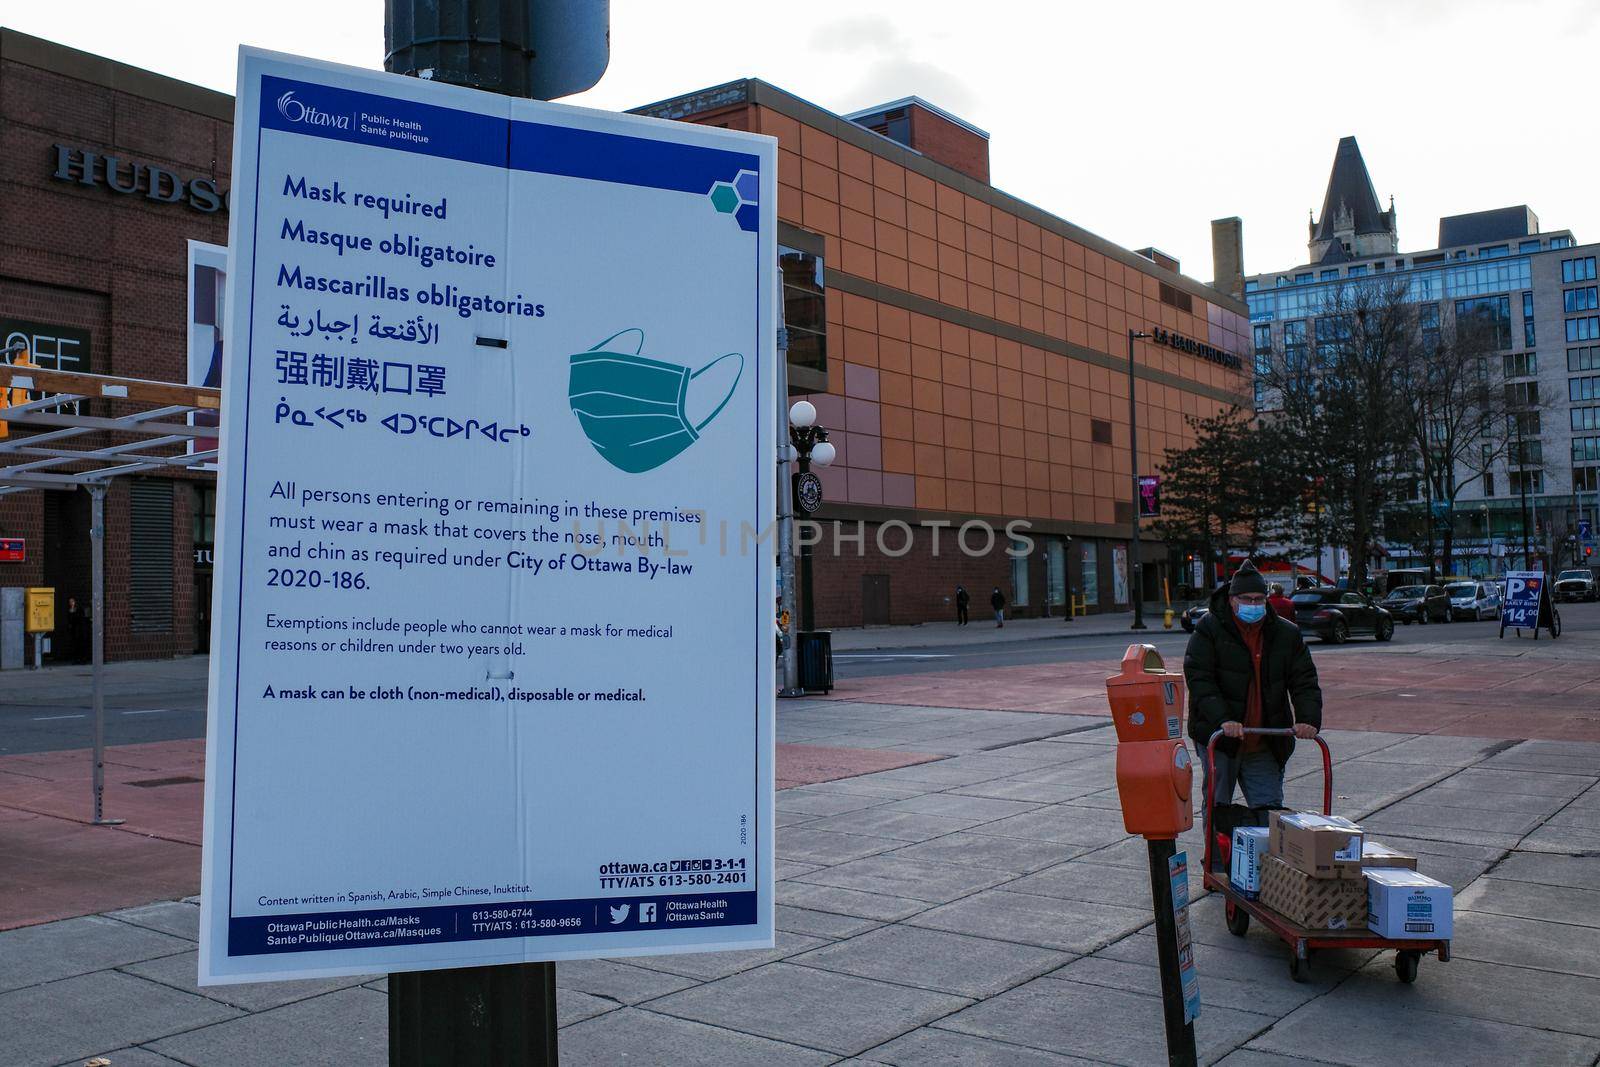 Ottawa, Ontario, Canada - November 18, 2020: A multilingual 'mask required' sign posted by Ottawa Public Health informs pedestrians of a COVID-19 prevention by-law in several languages.